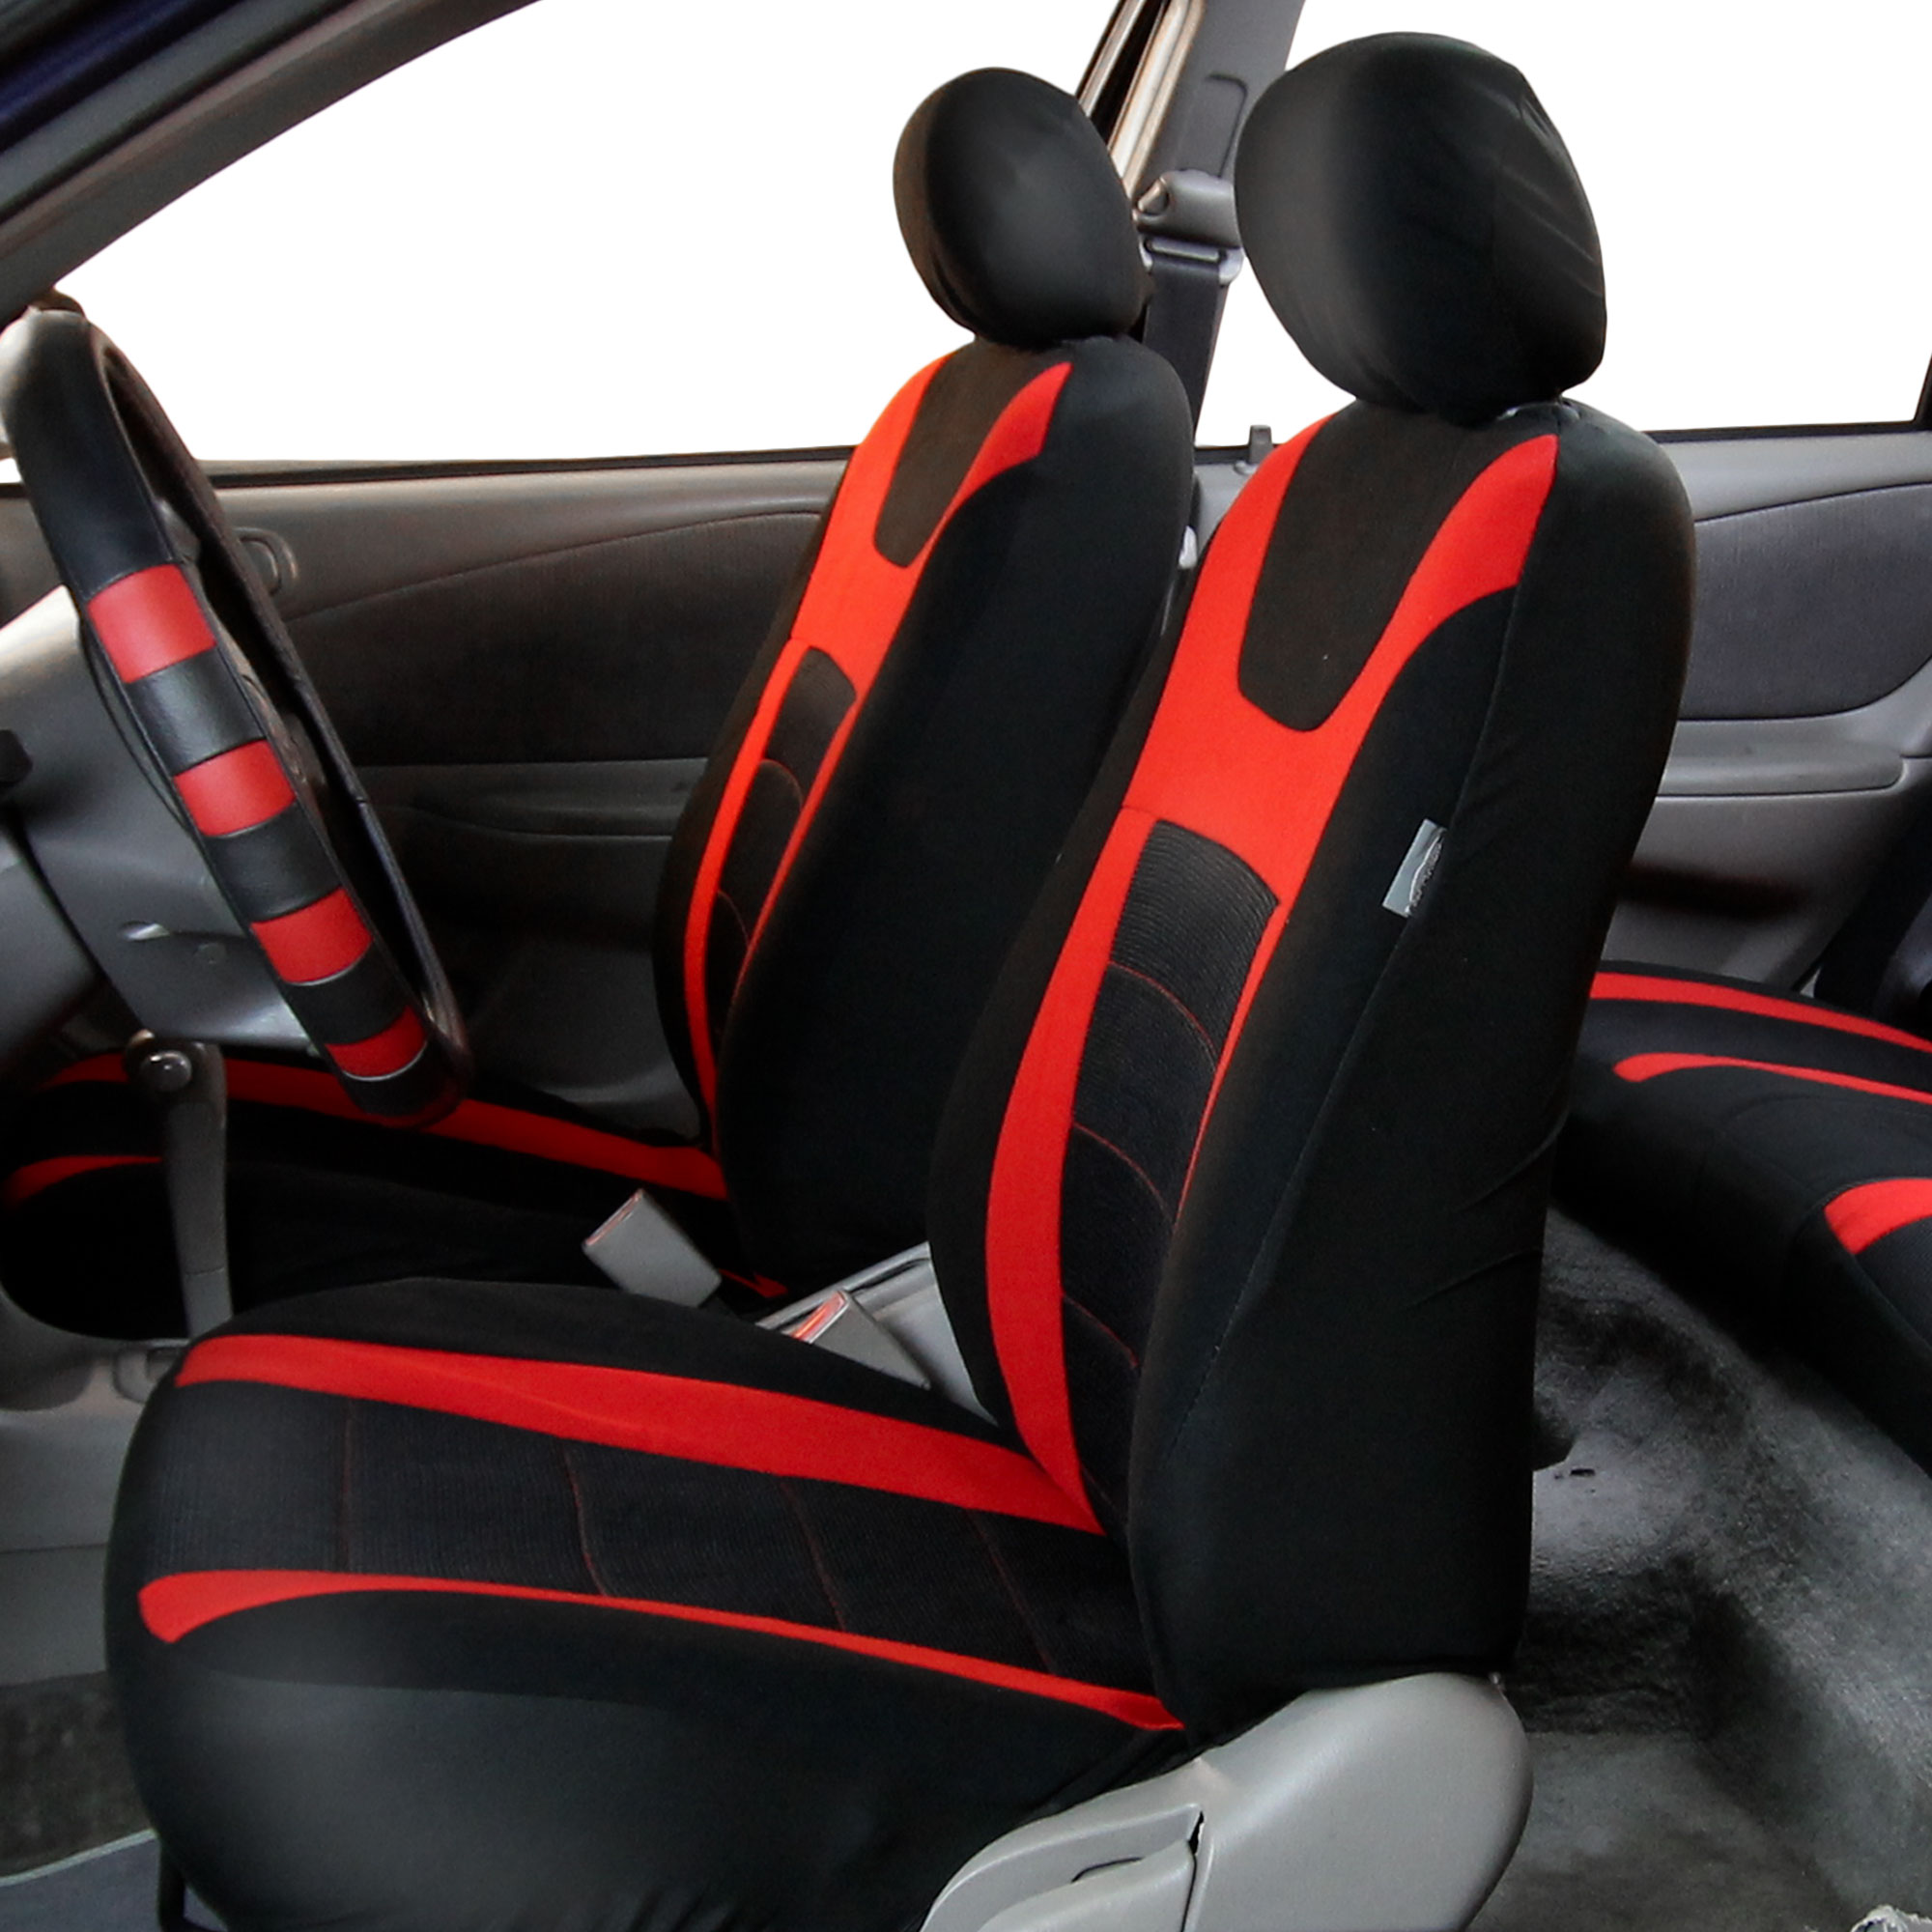 FH Group Red 3D Air Mesh Front Set Car Seat Cover with Air Freshener - image 2 of 3